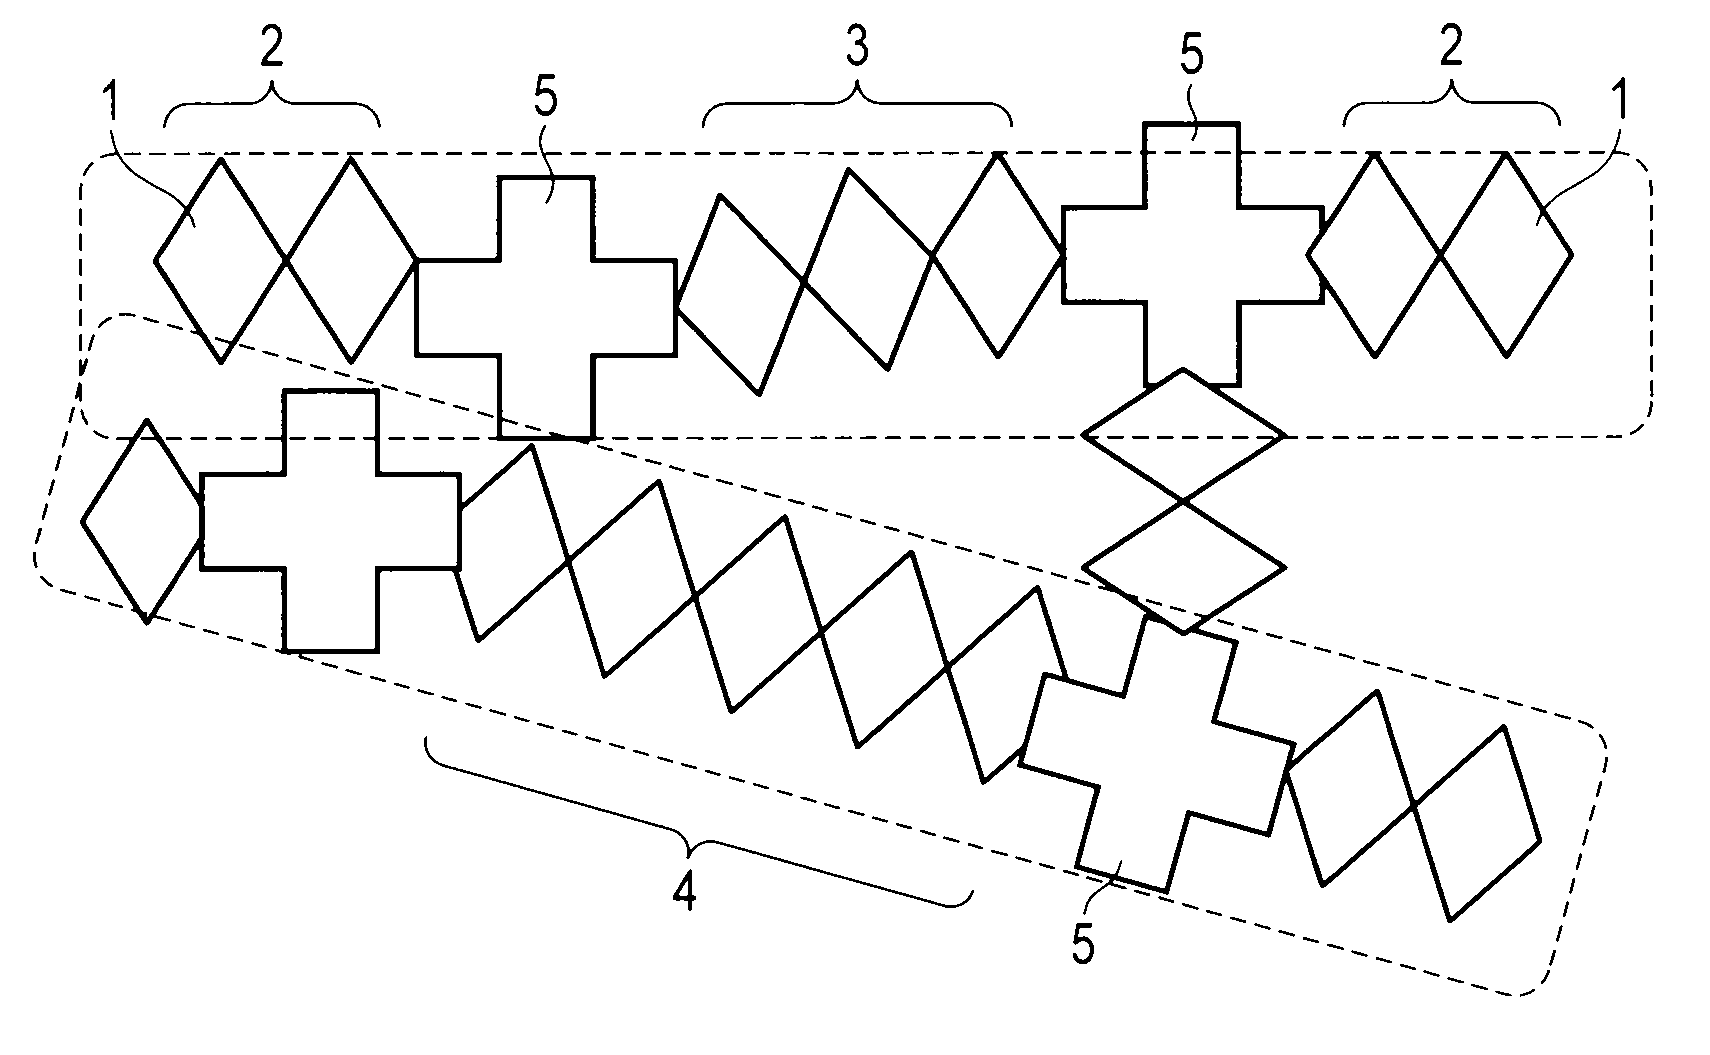 Low dielectric constant insulating film and method for forming the same